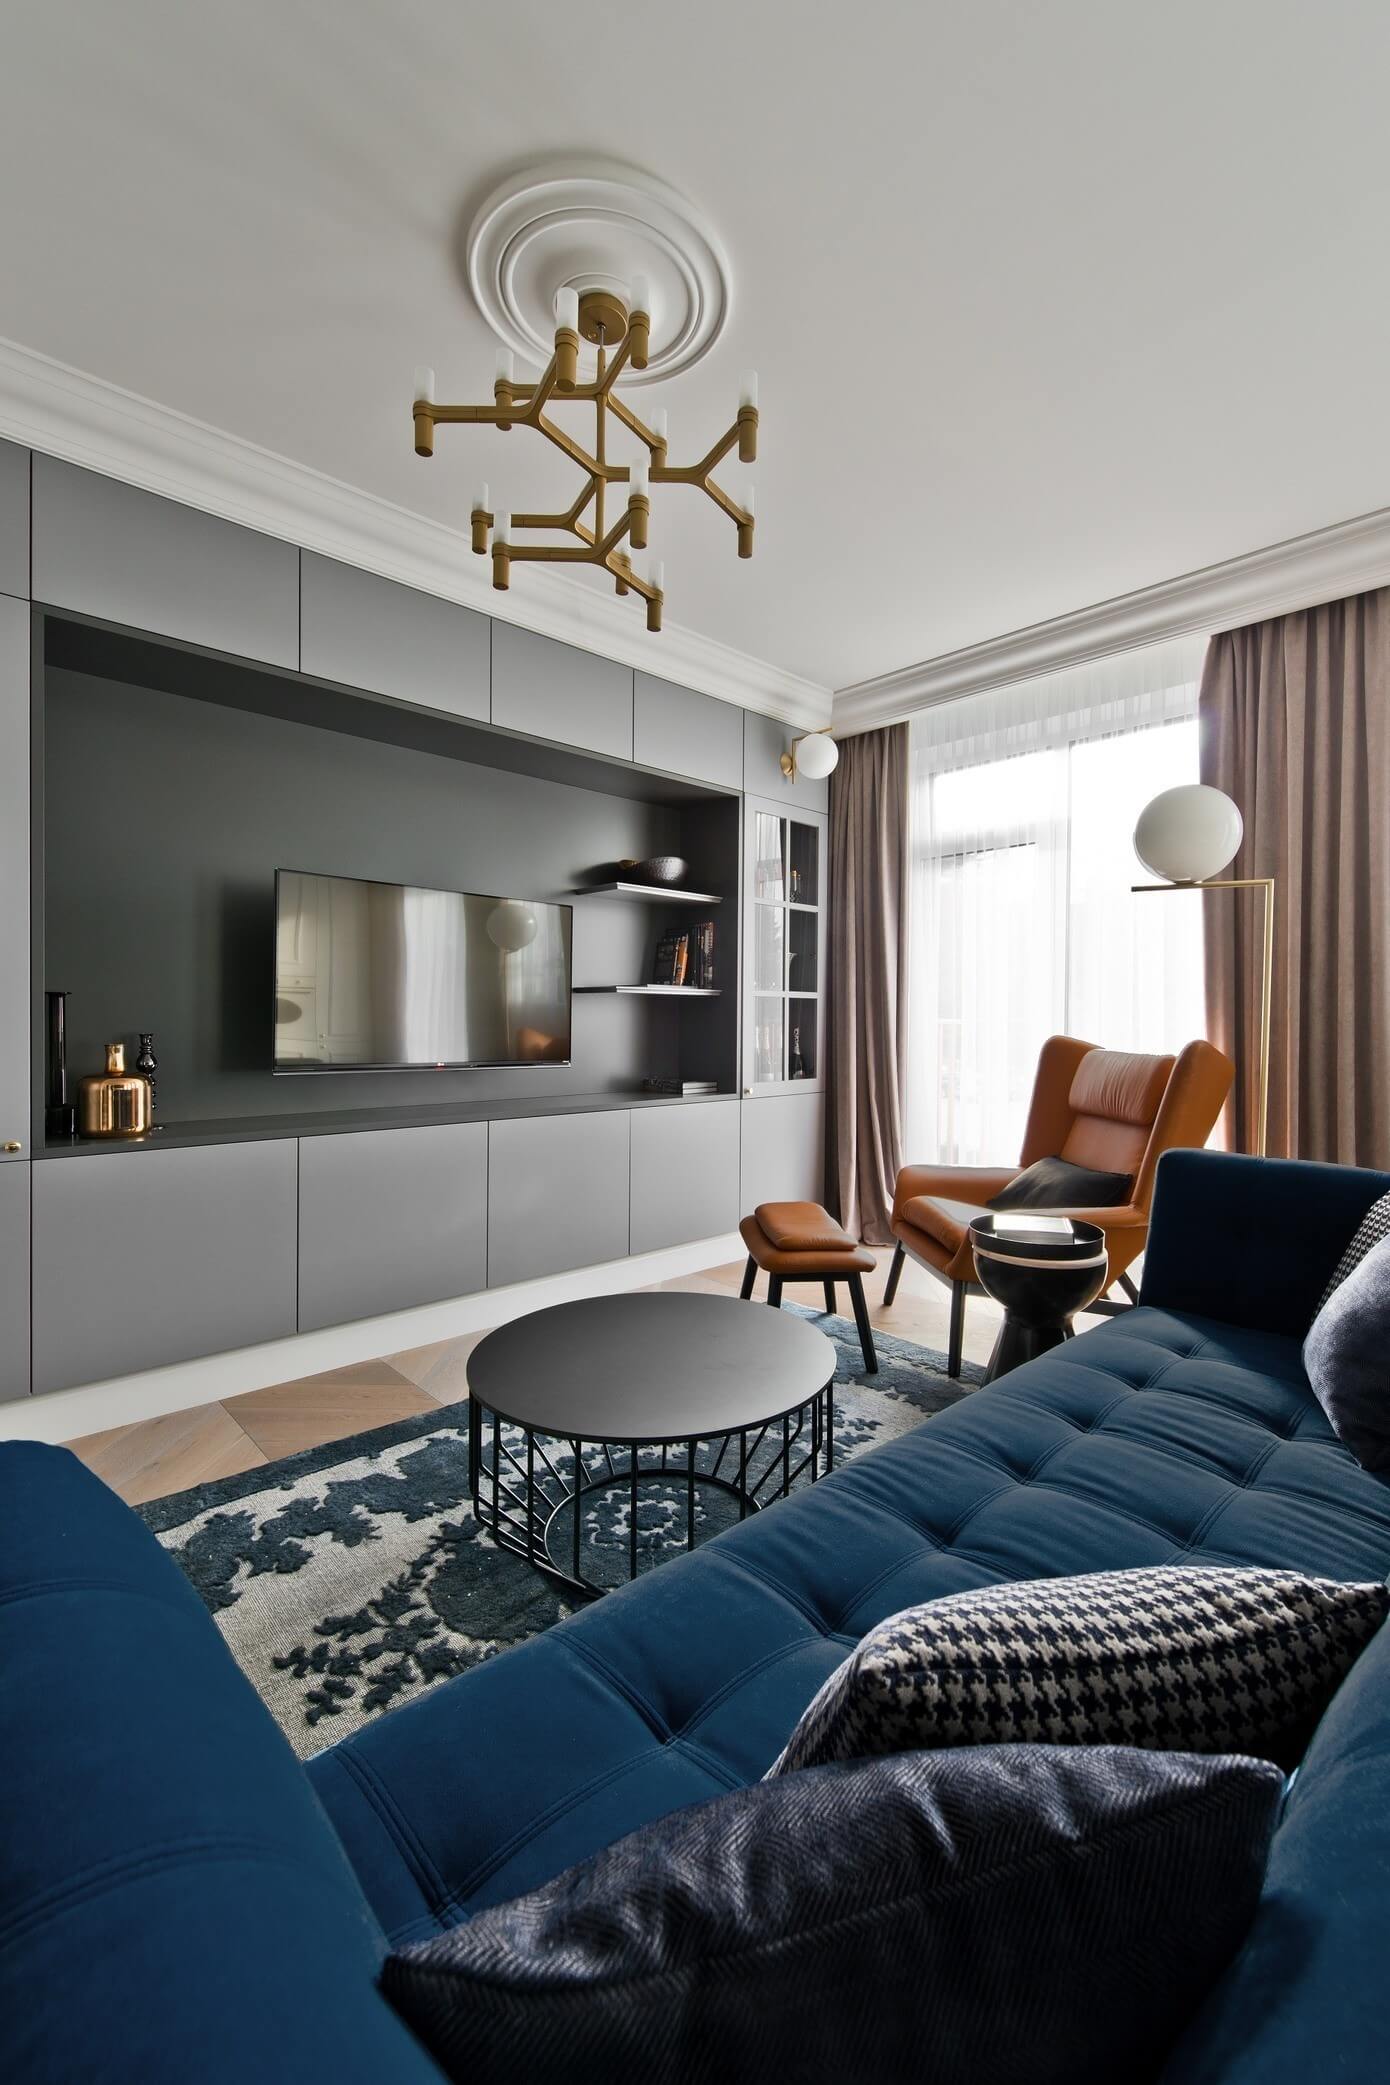 Apartment in Vilnius by Indre Sunklodiene